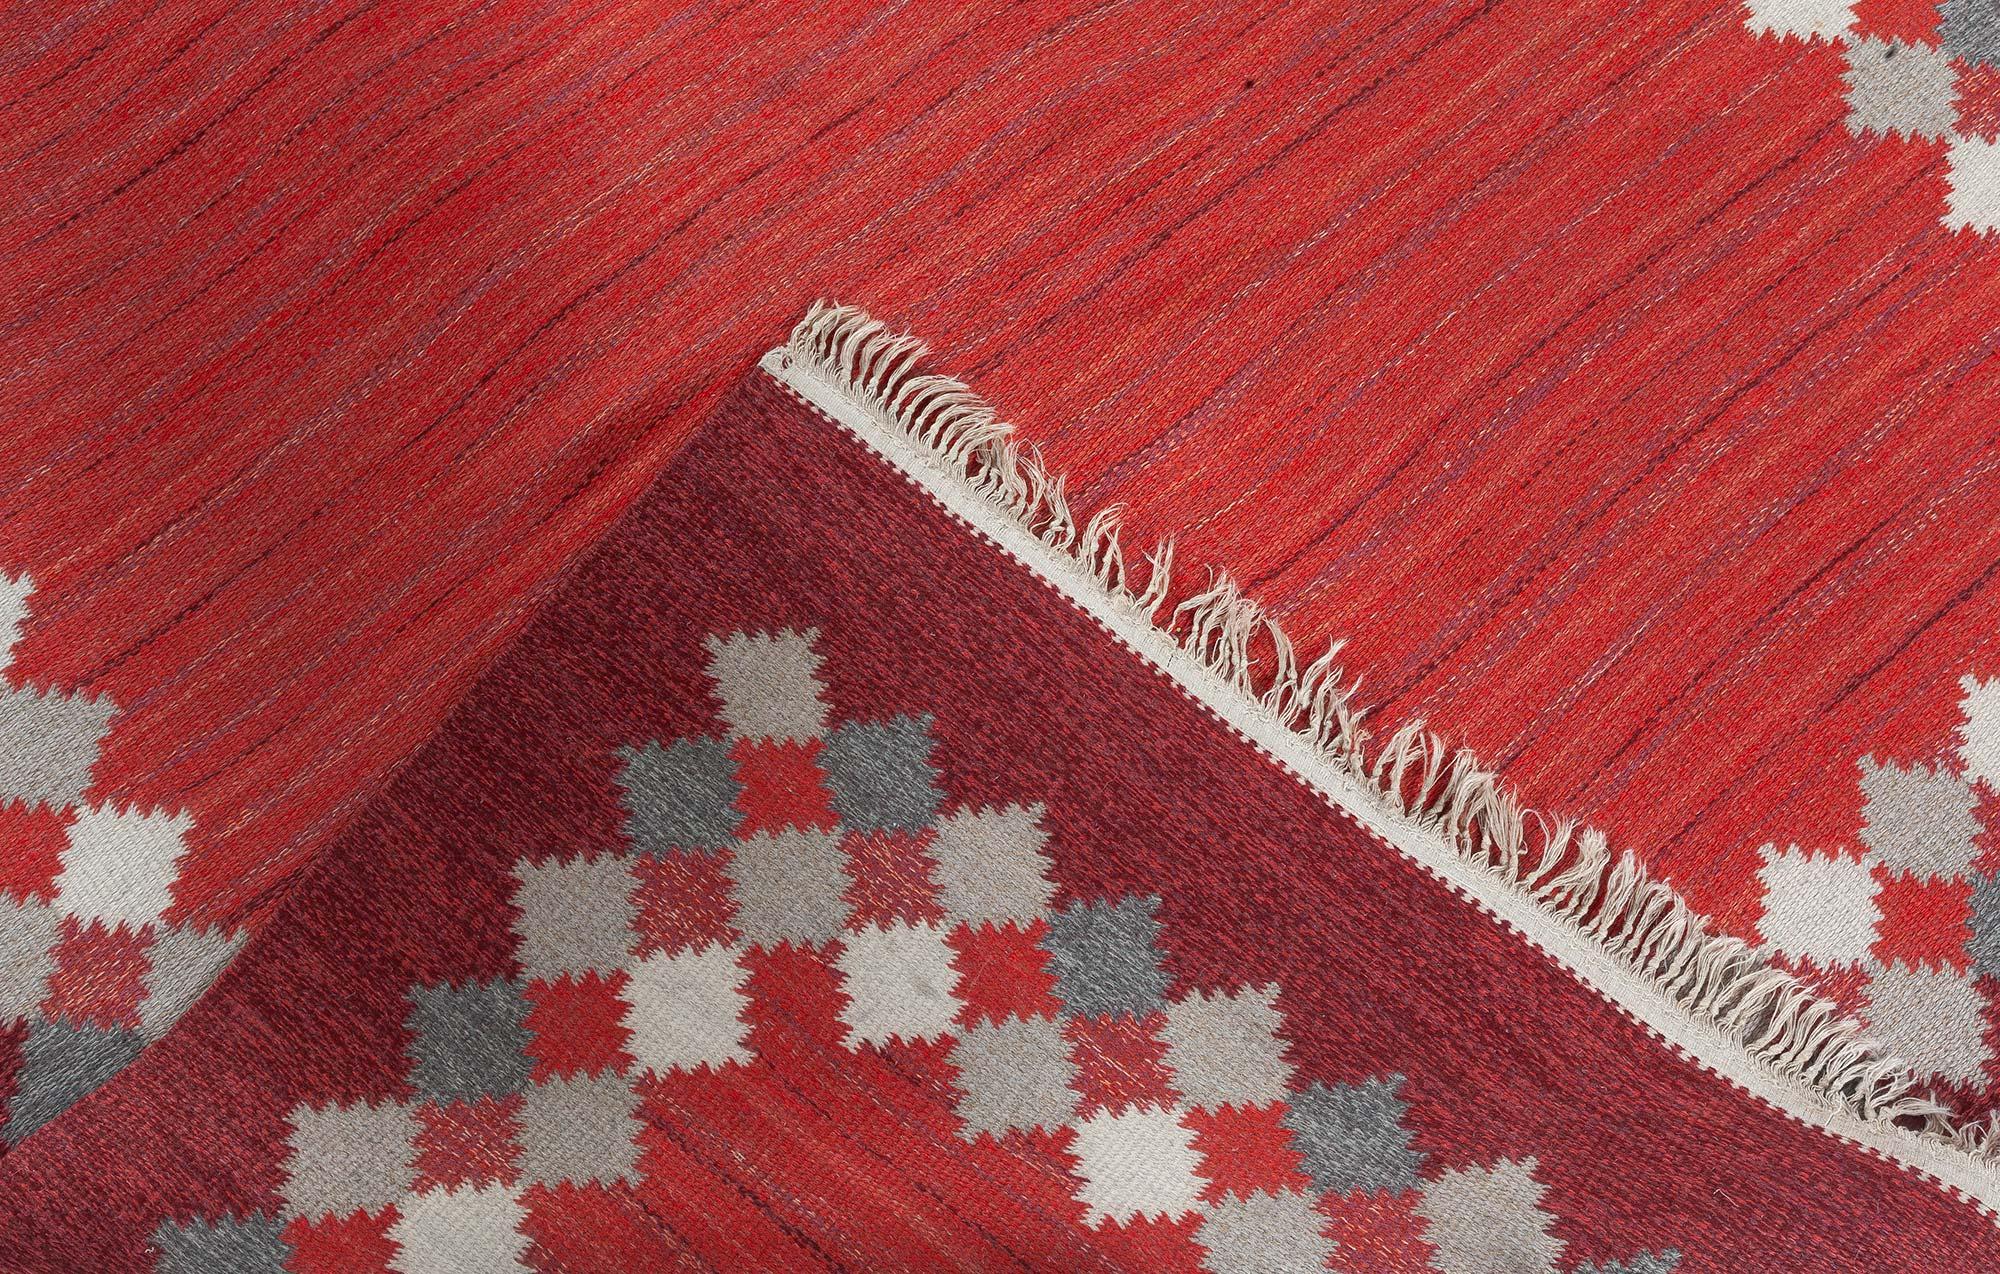 Midcentury Swedish Flat Woven Rug by Ingegerd Silow In Good Condition For Sale In New York, NY